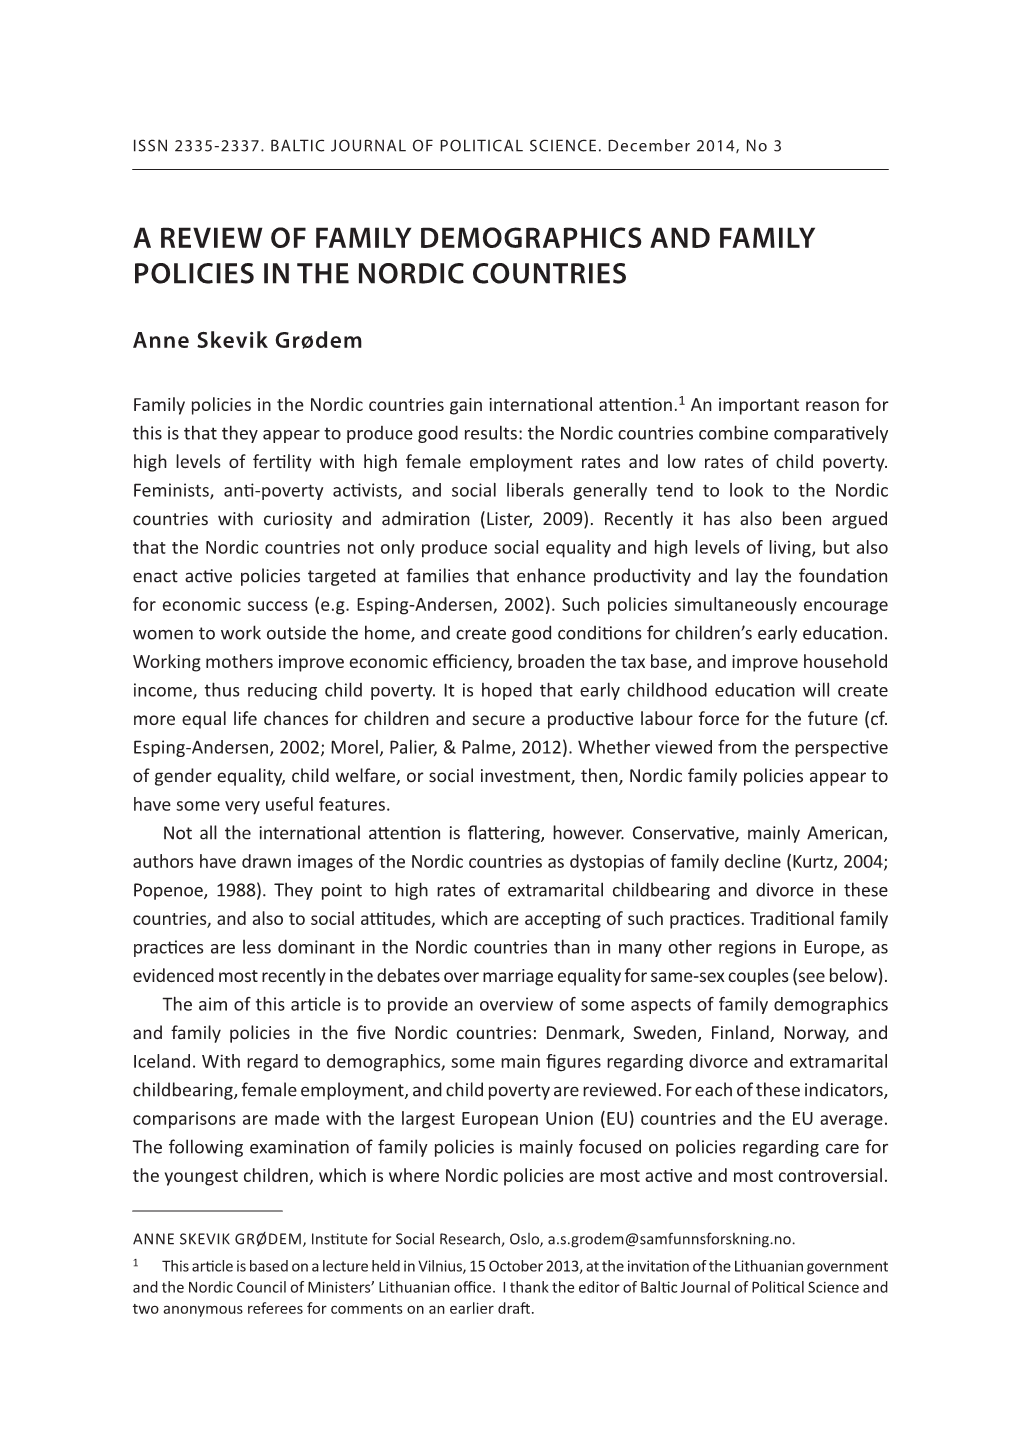 A Review of Family Demographics and Family Policies in the Nordic Countries